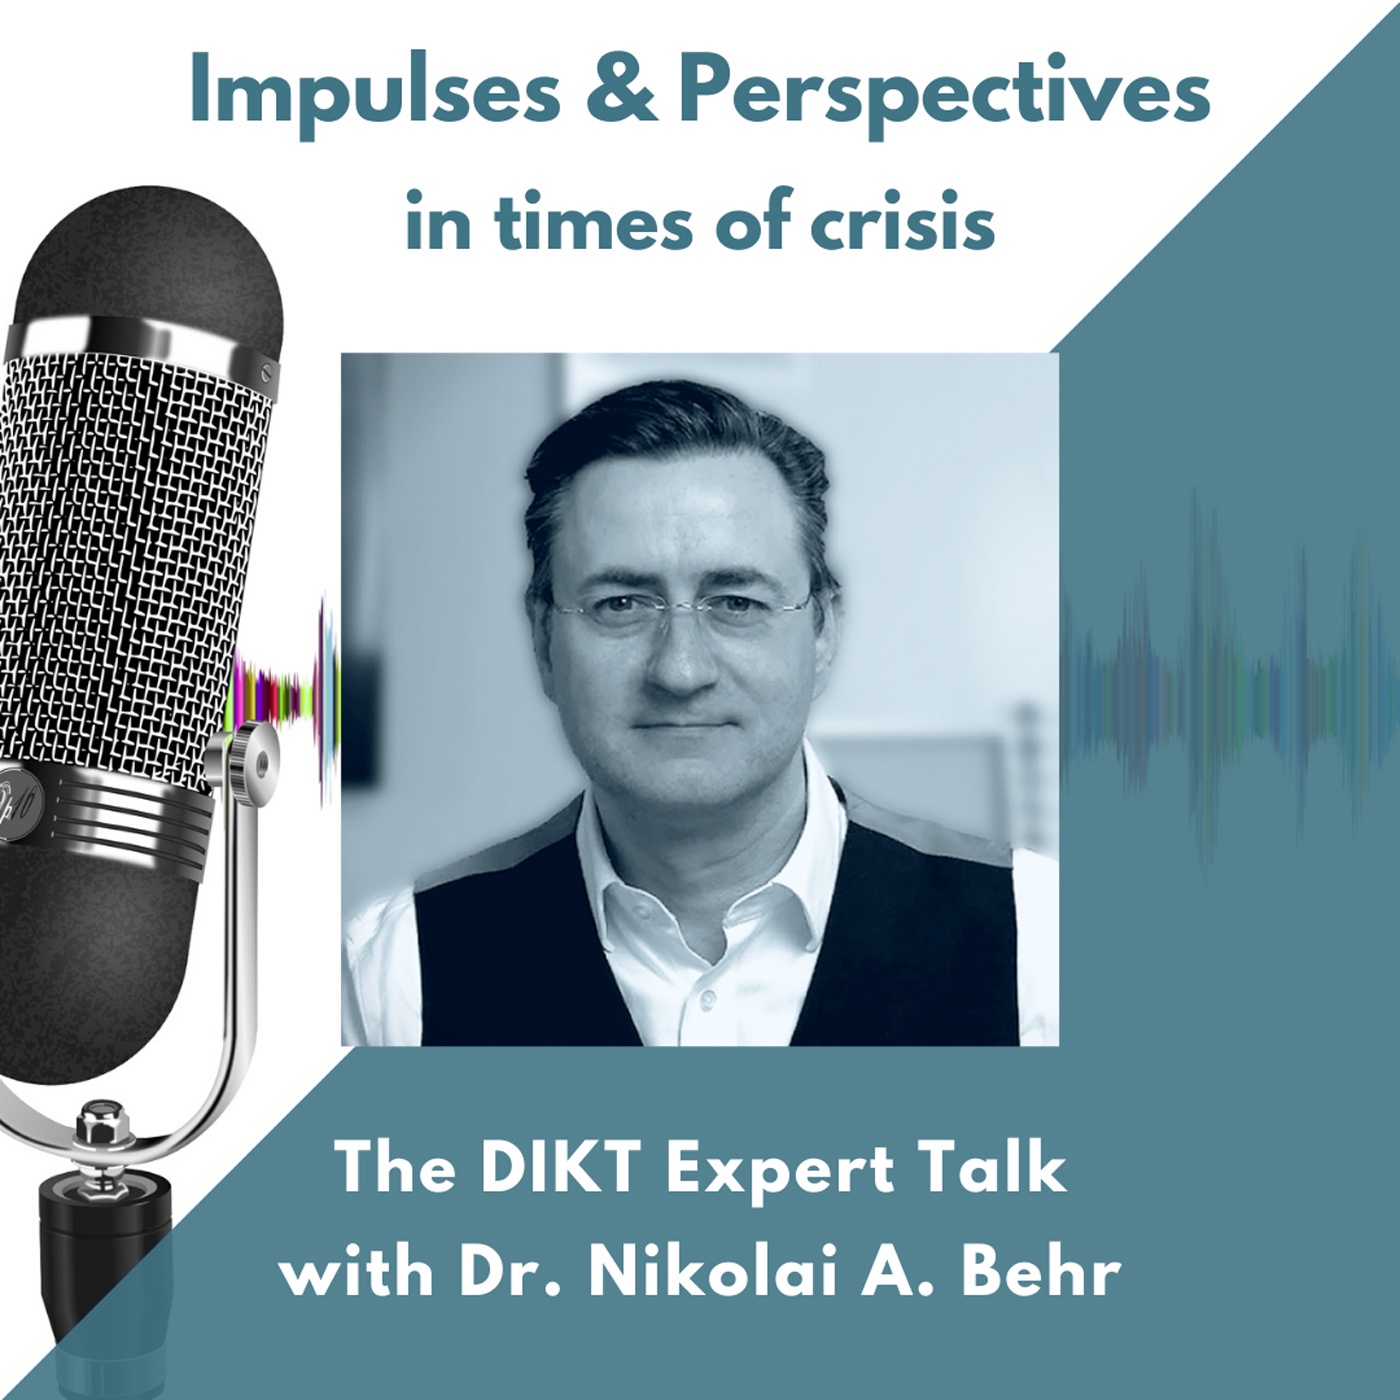 Impulses & Perspectives - The Expert Talk in Times of Crisis hosted by Dr Nikolai A. Behr